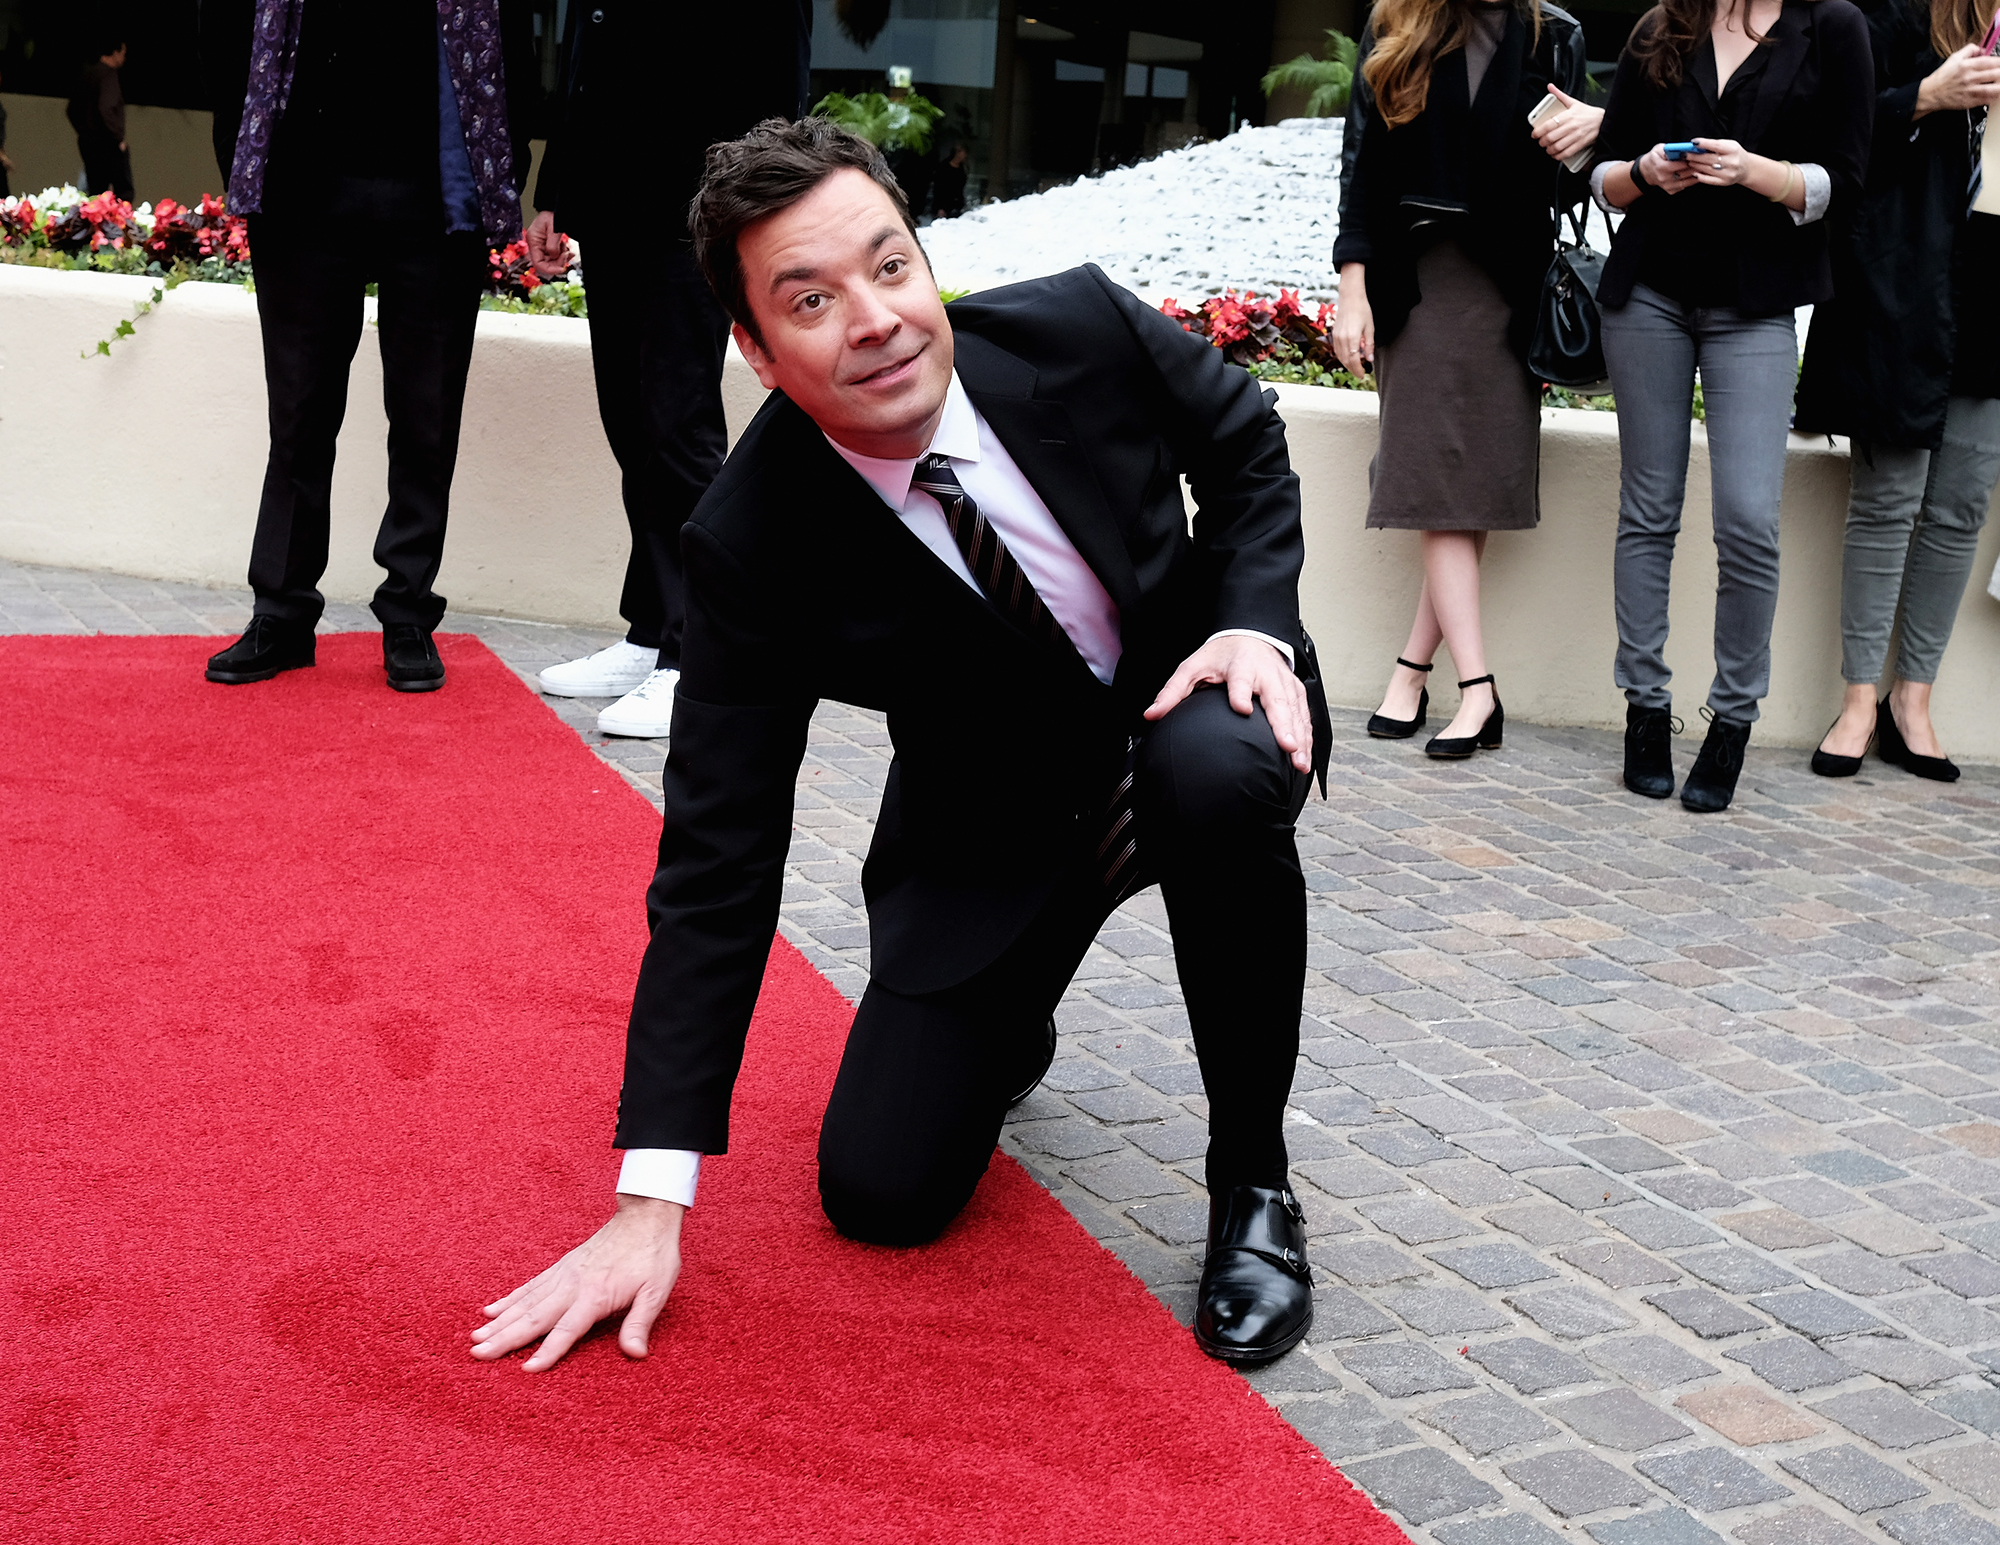 Jimmy Fallon attends the 74th Annual Golden Globes Preview Day at The Beverly Hilton Hotel on Jan. 4, 2017 in Beverly Hills, Calif.